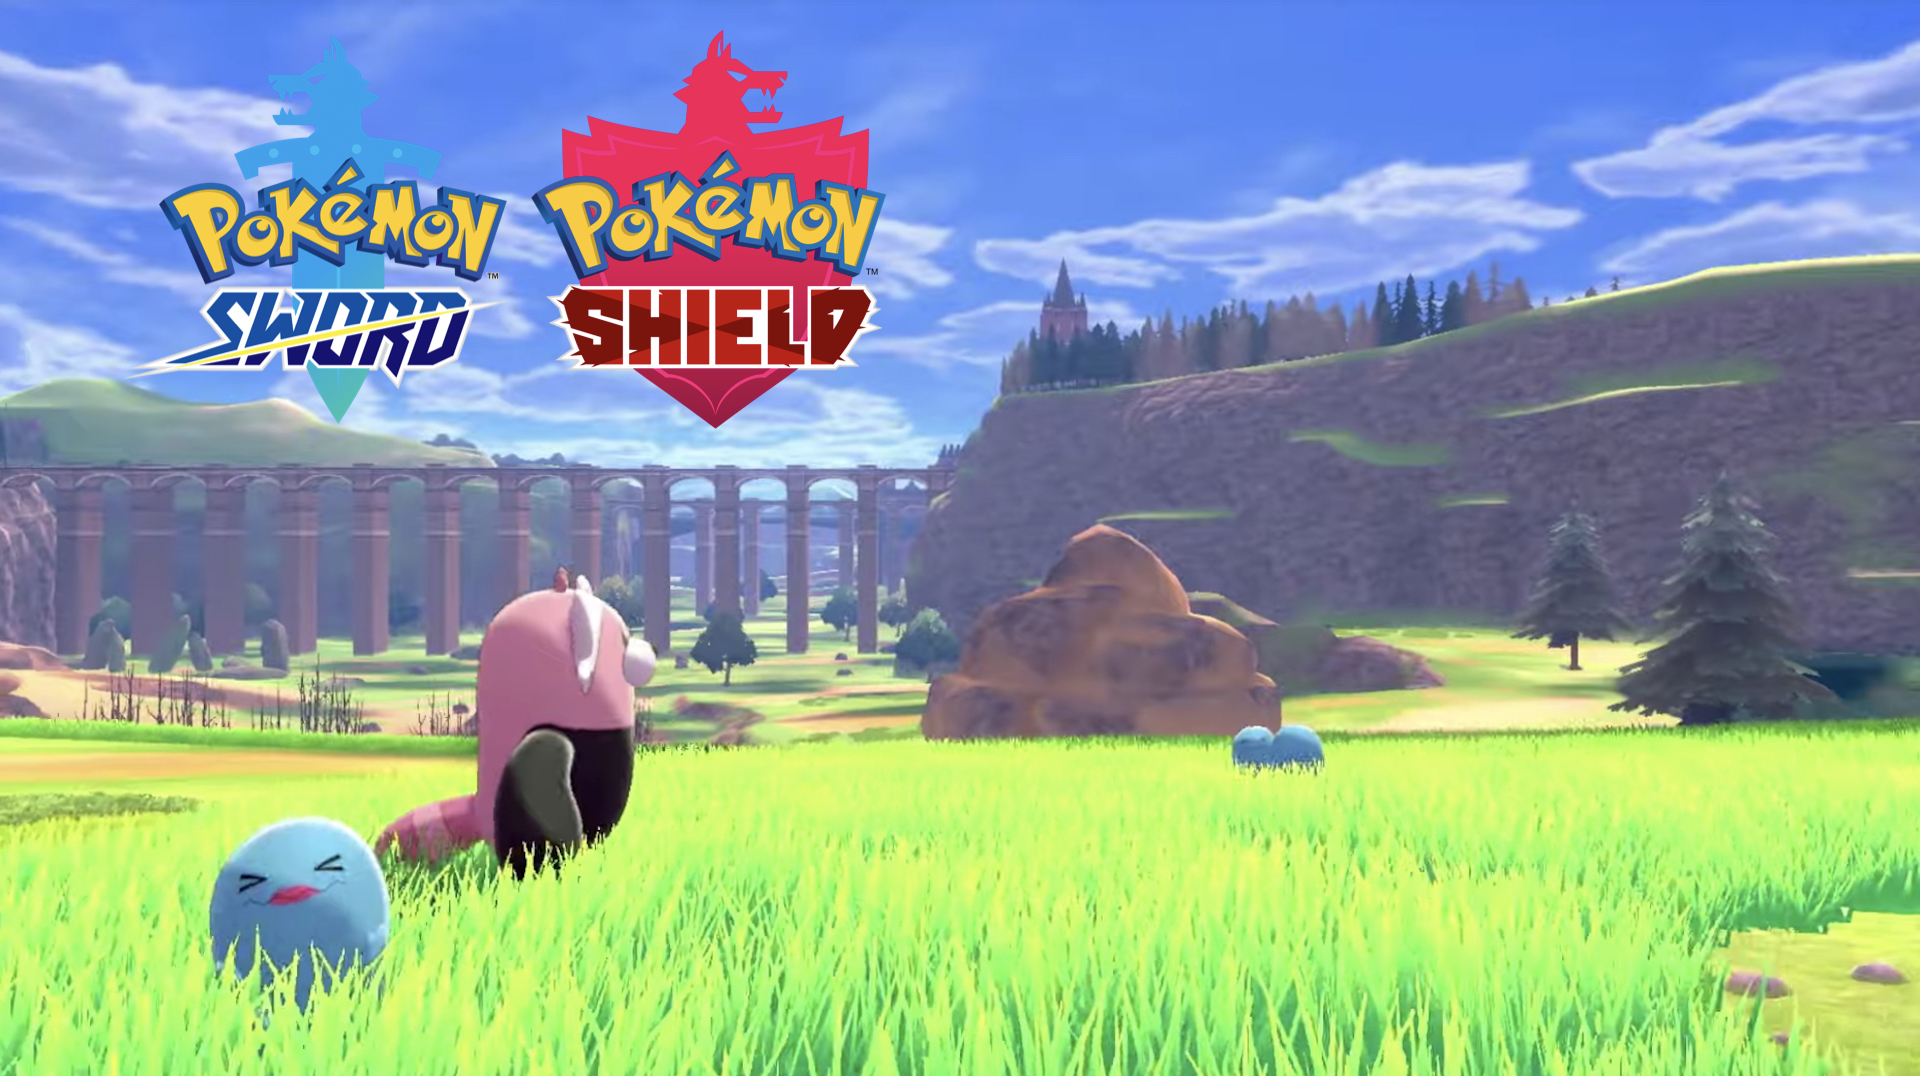 Pokemon Sword and Shield controversy is blowing up from Pokedex